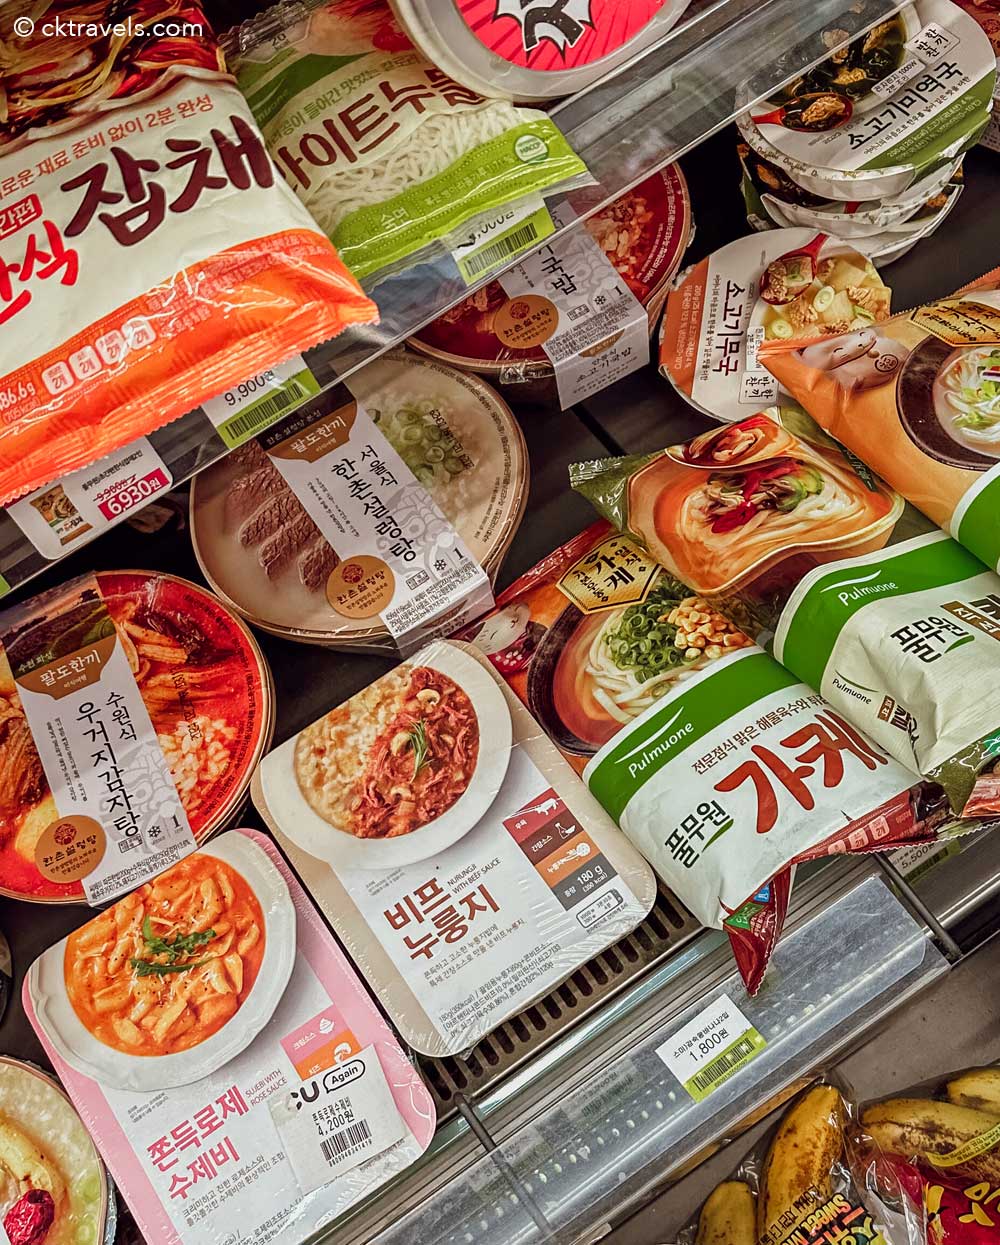 Ready meals from CU convenience stores in South Korea